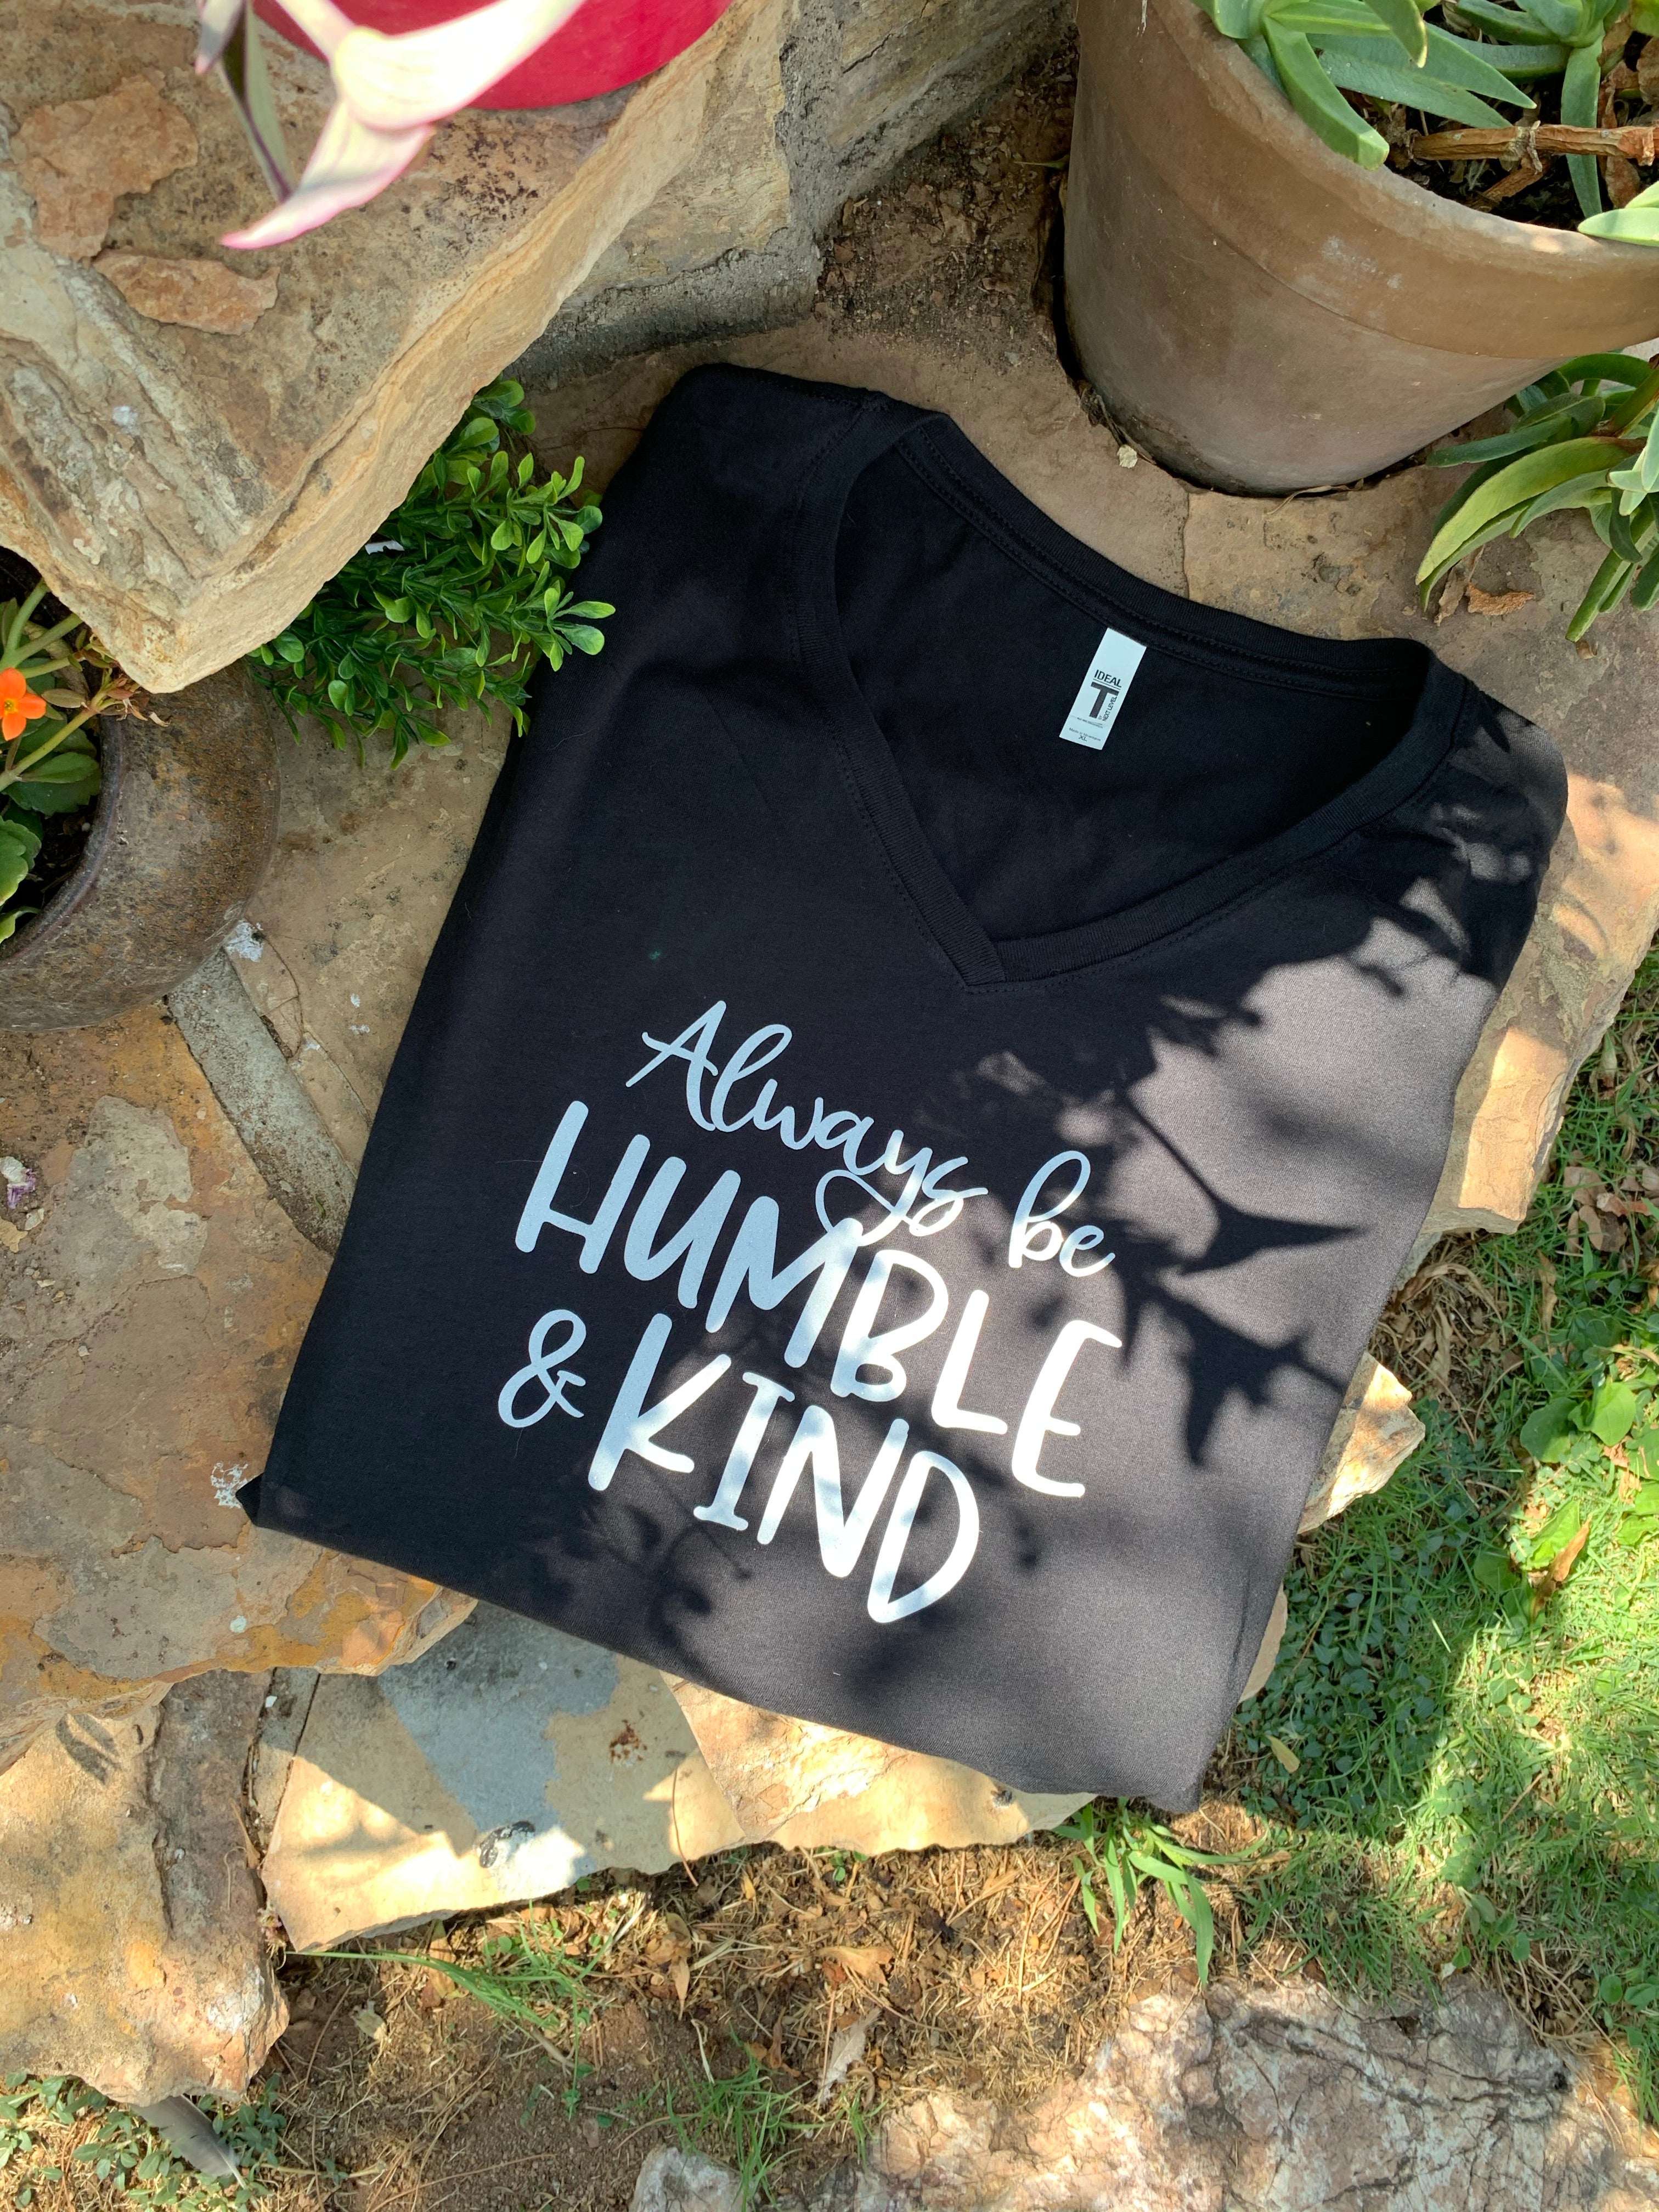 Graphic Message Tee Always be Humble and Kind